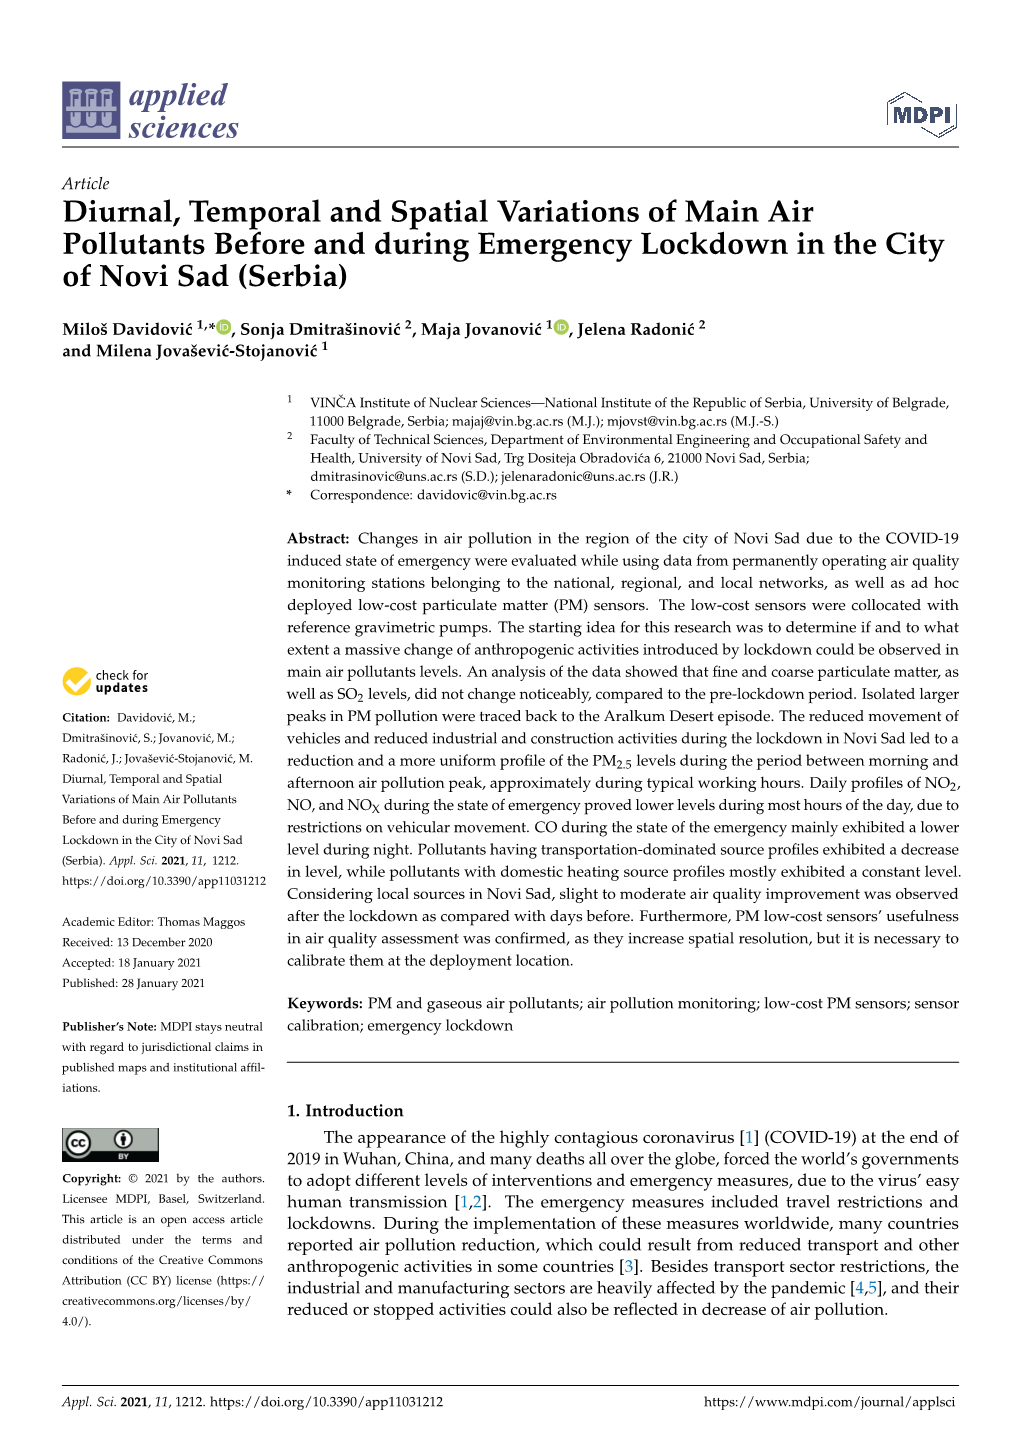 Diurnal, Temporal and Spatial Variations of Main Air Pollutants Before and During Emergency Lockdown in the City of Novi Sad (Serbia)